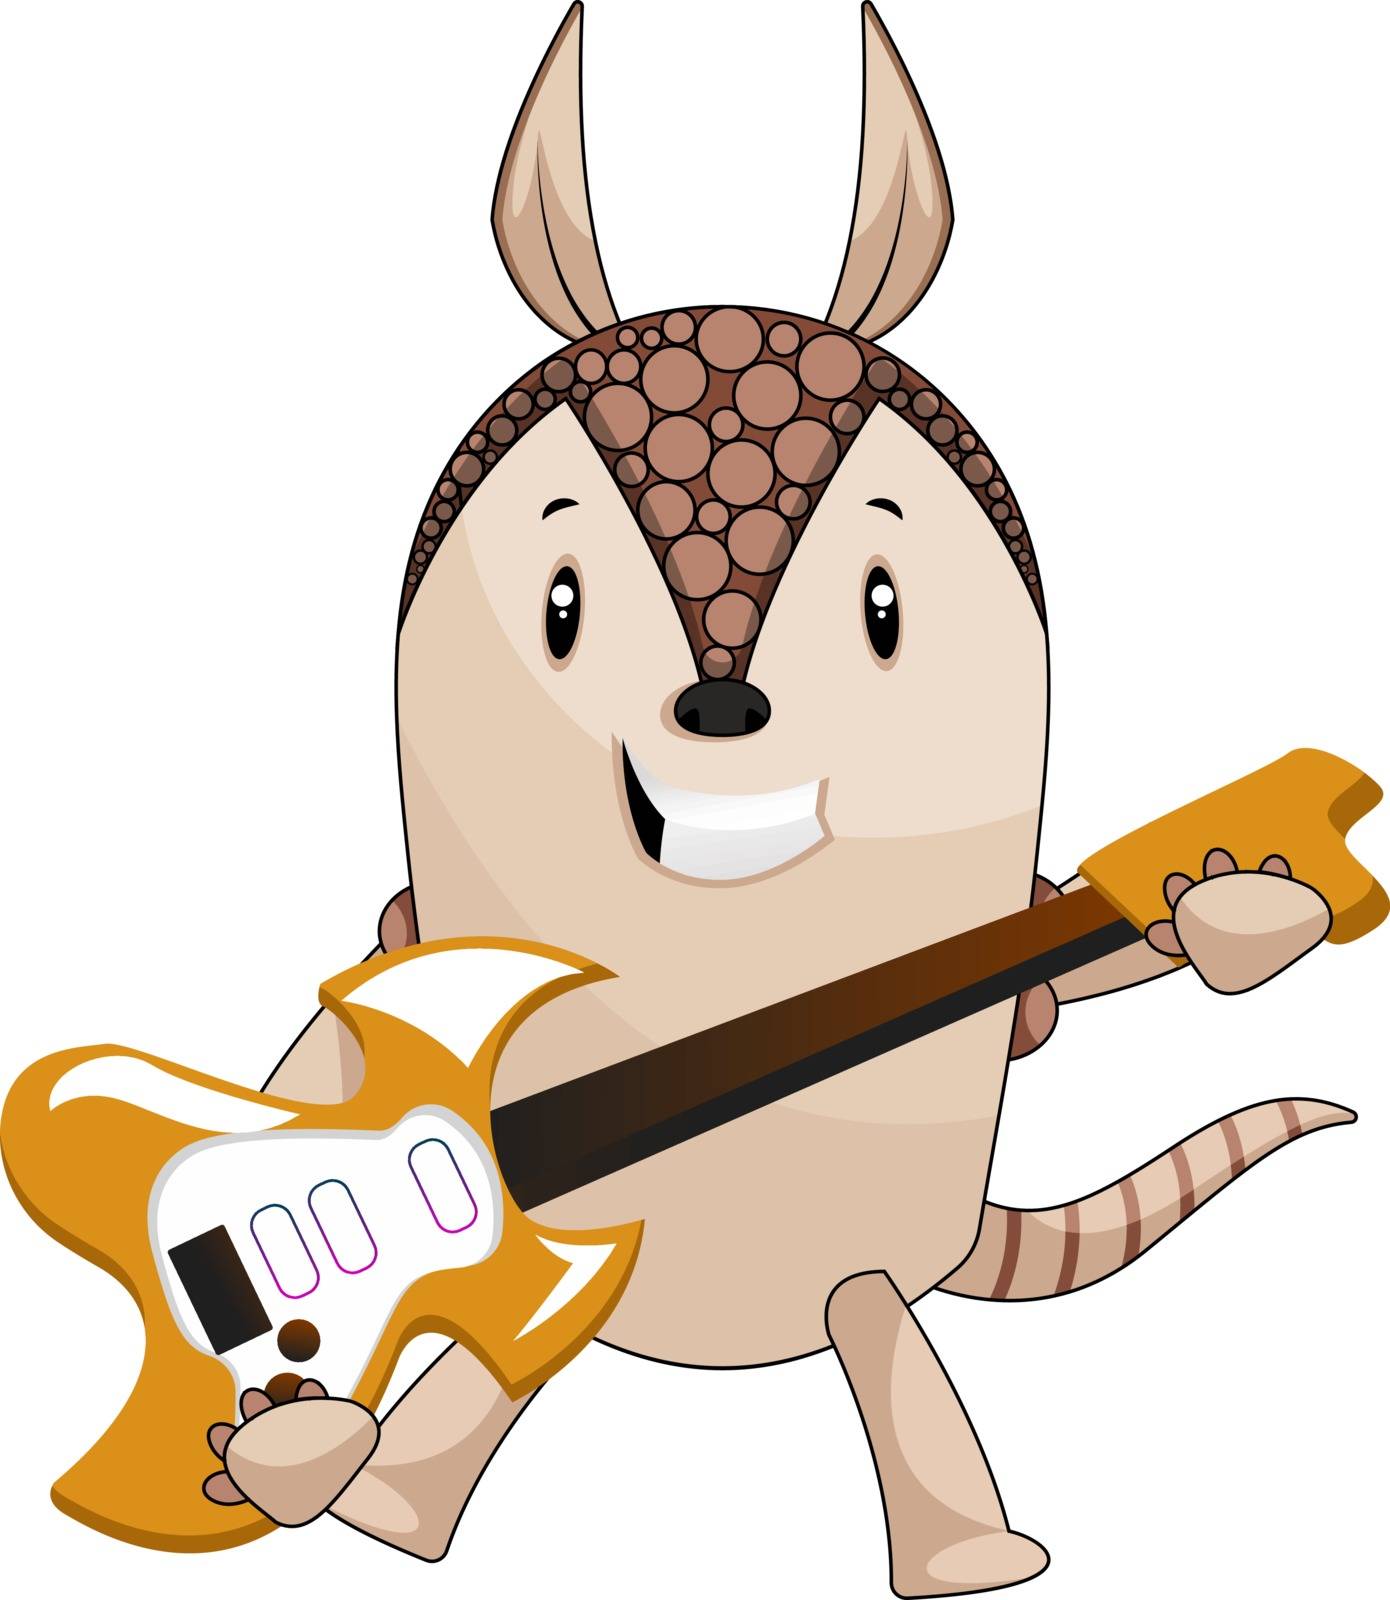 Armadillo playing guitar, illustration, vector on white backgrou by Morphart